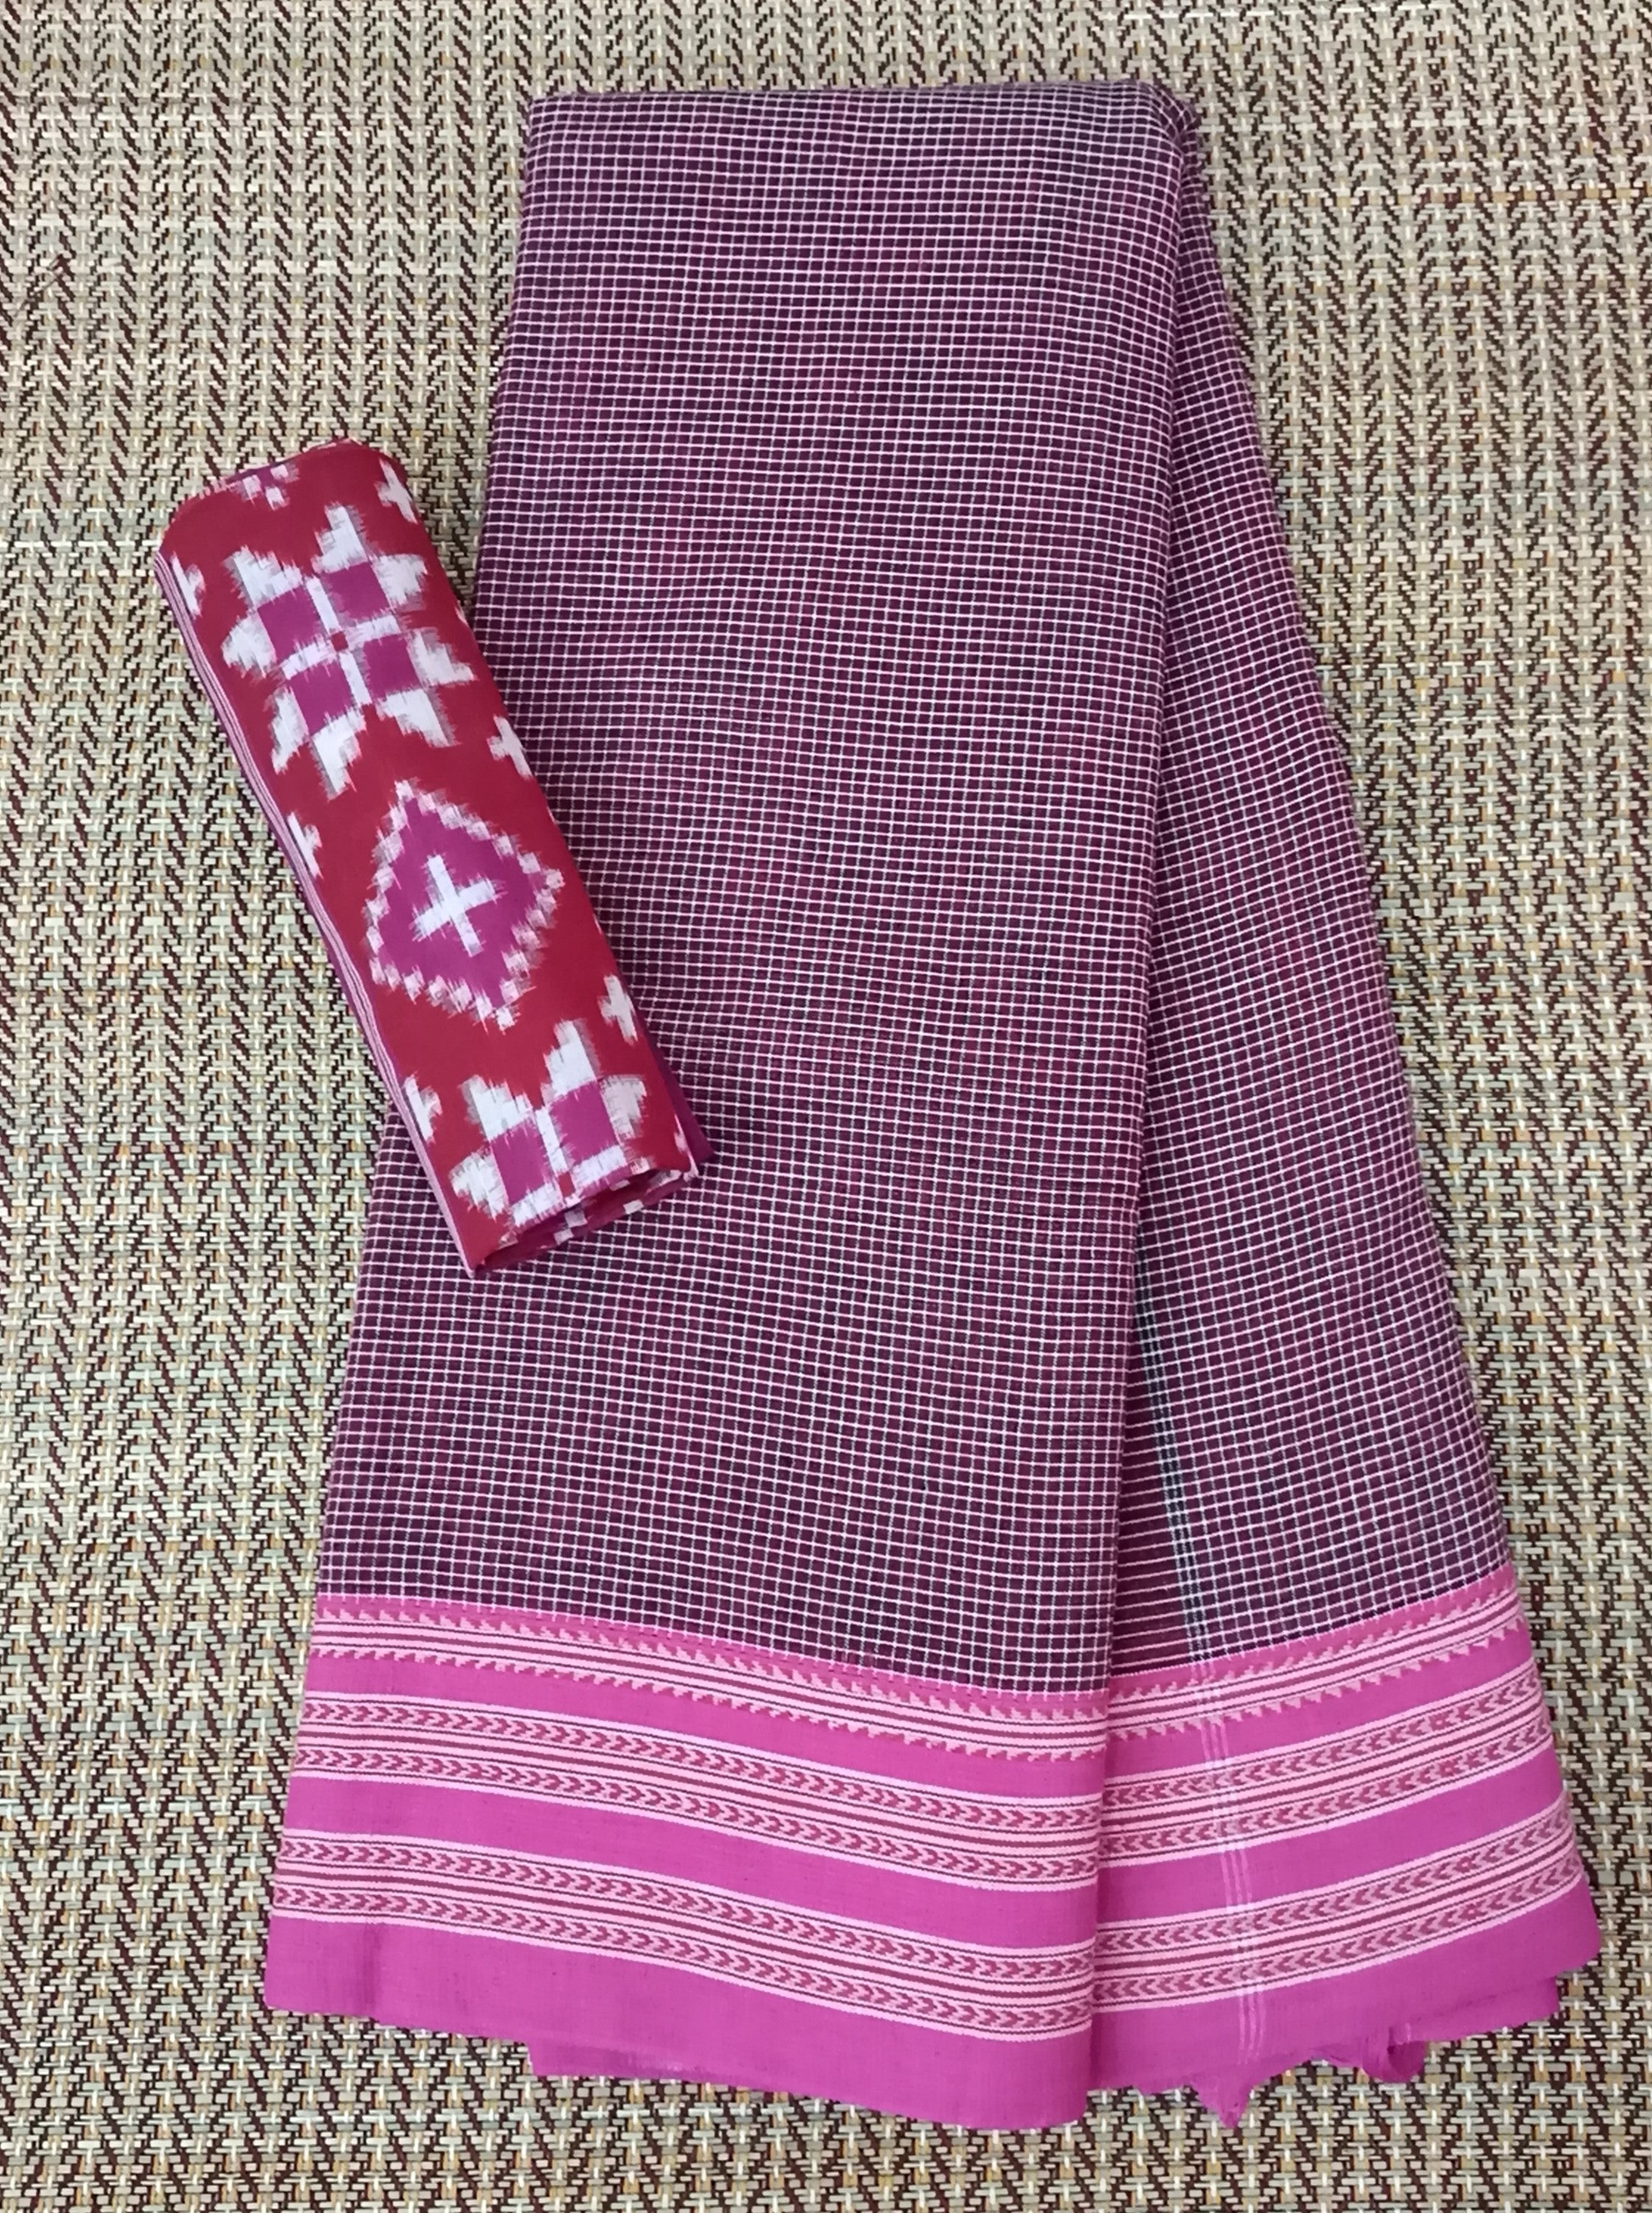 Umbara's 100% pure handloom cotton saree, matched with a Ikat readymade blouse from Umbara,  Unleash your inner confidence with this fabric Fashion as unique as you are. 